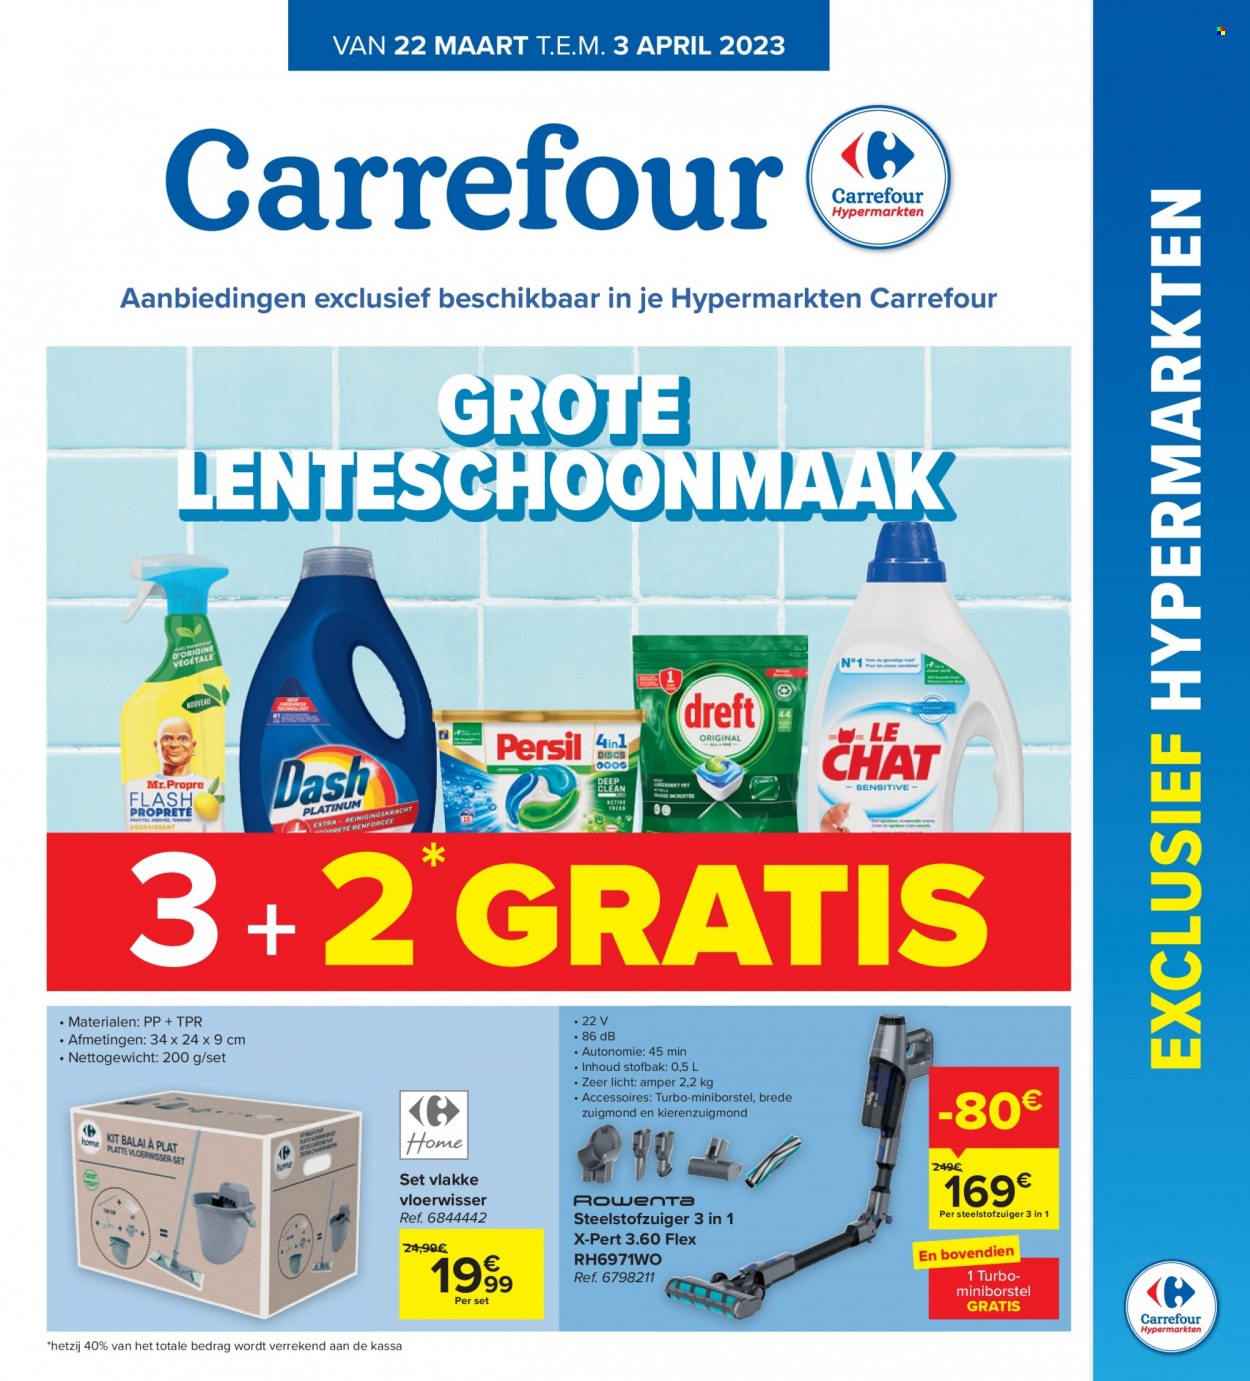 Catalogue Carrefour hypermarkt - 22.3.2023 - 3.4.2023. Page 1.